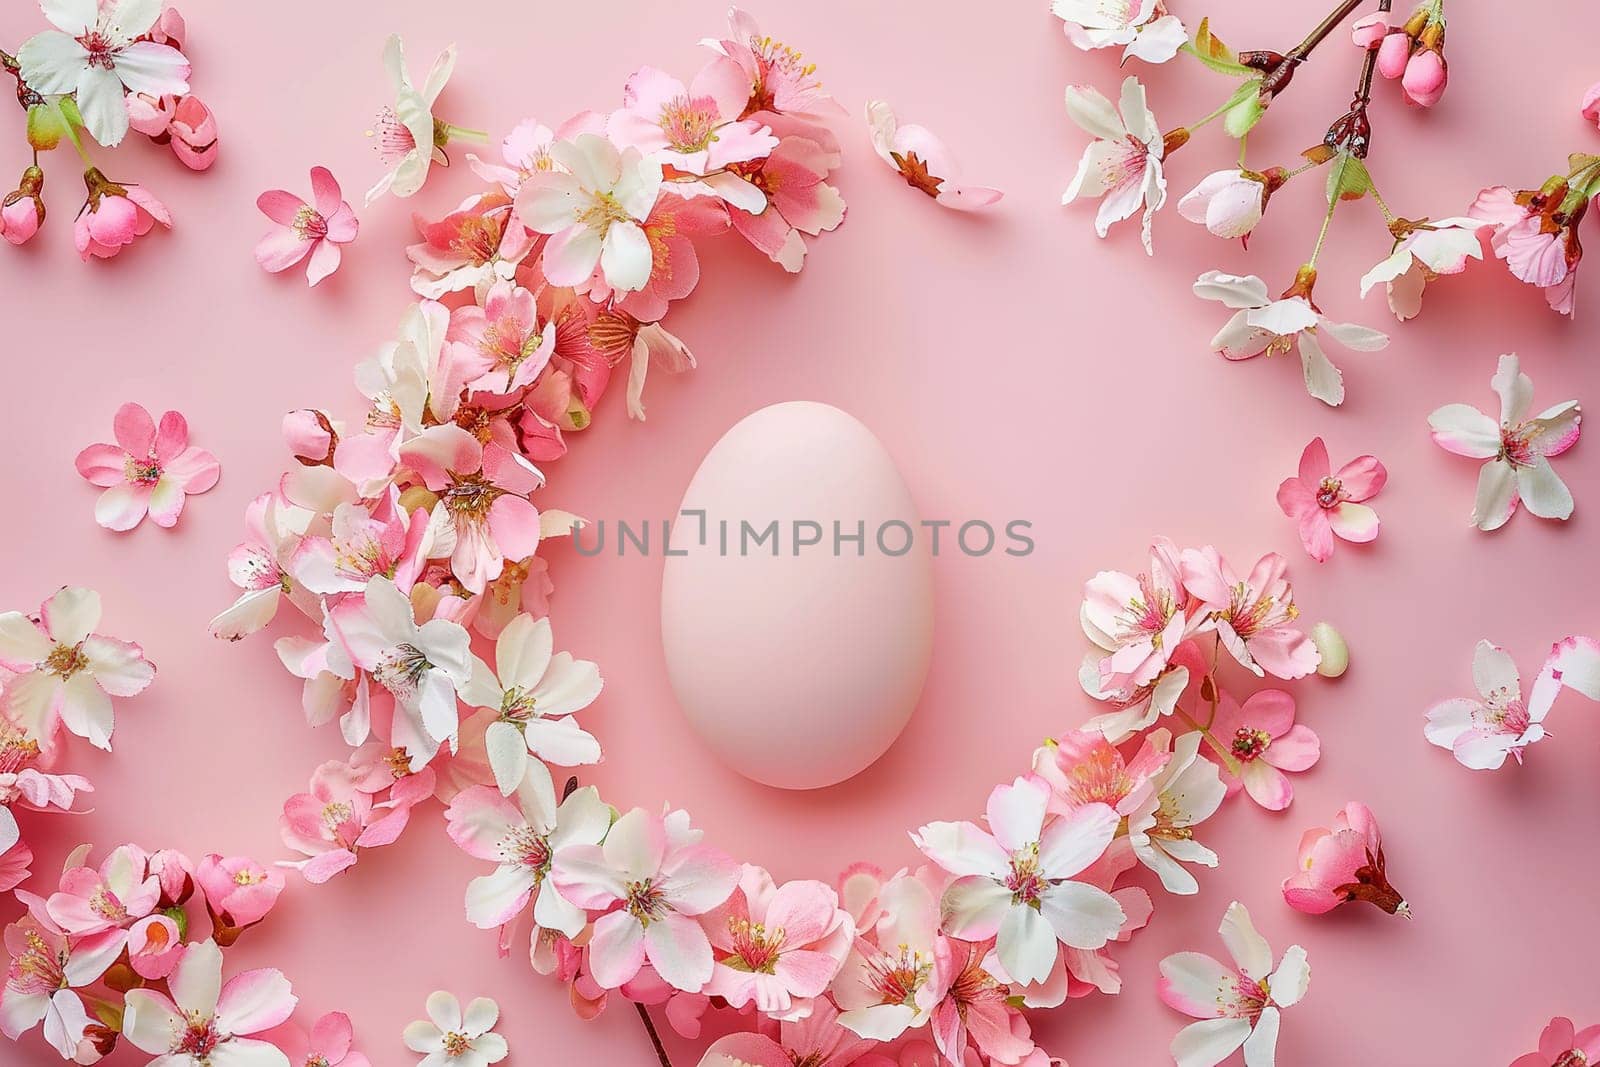 Celebrate the essence of spring with this enchanting Easter egg framed by a wreath of delicate cherry blossoms, perfect for seasonal marketing, greeting cards, or festive backgrounds. Generative AI